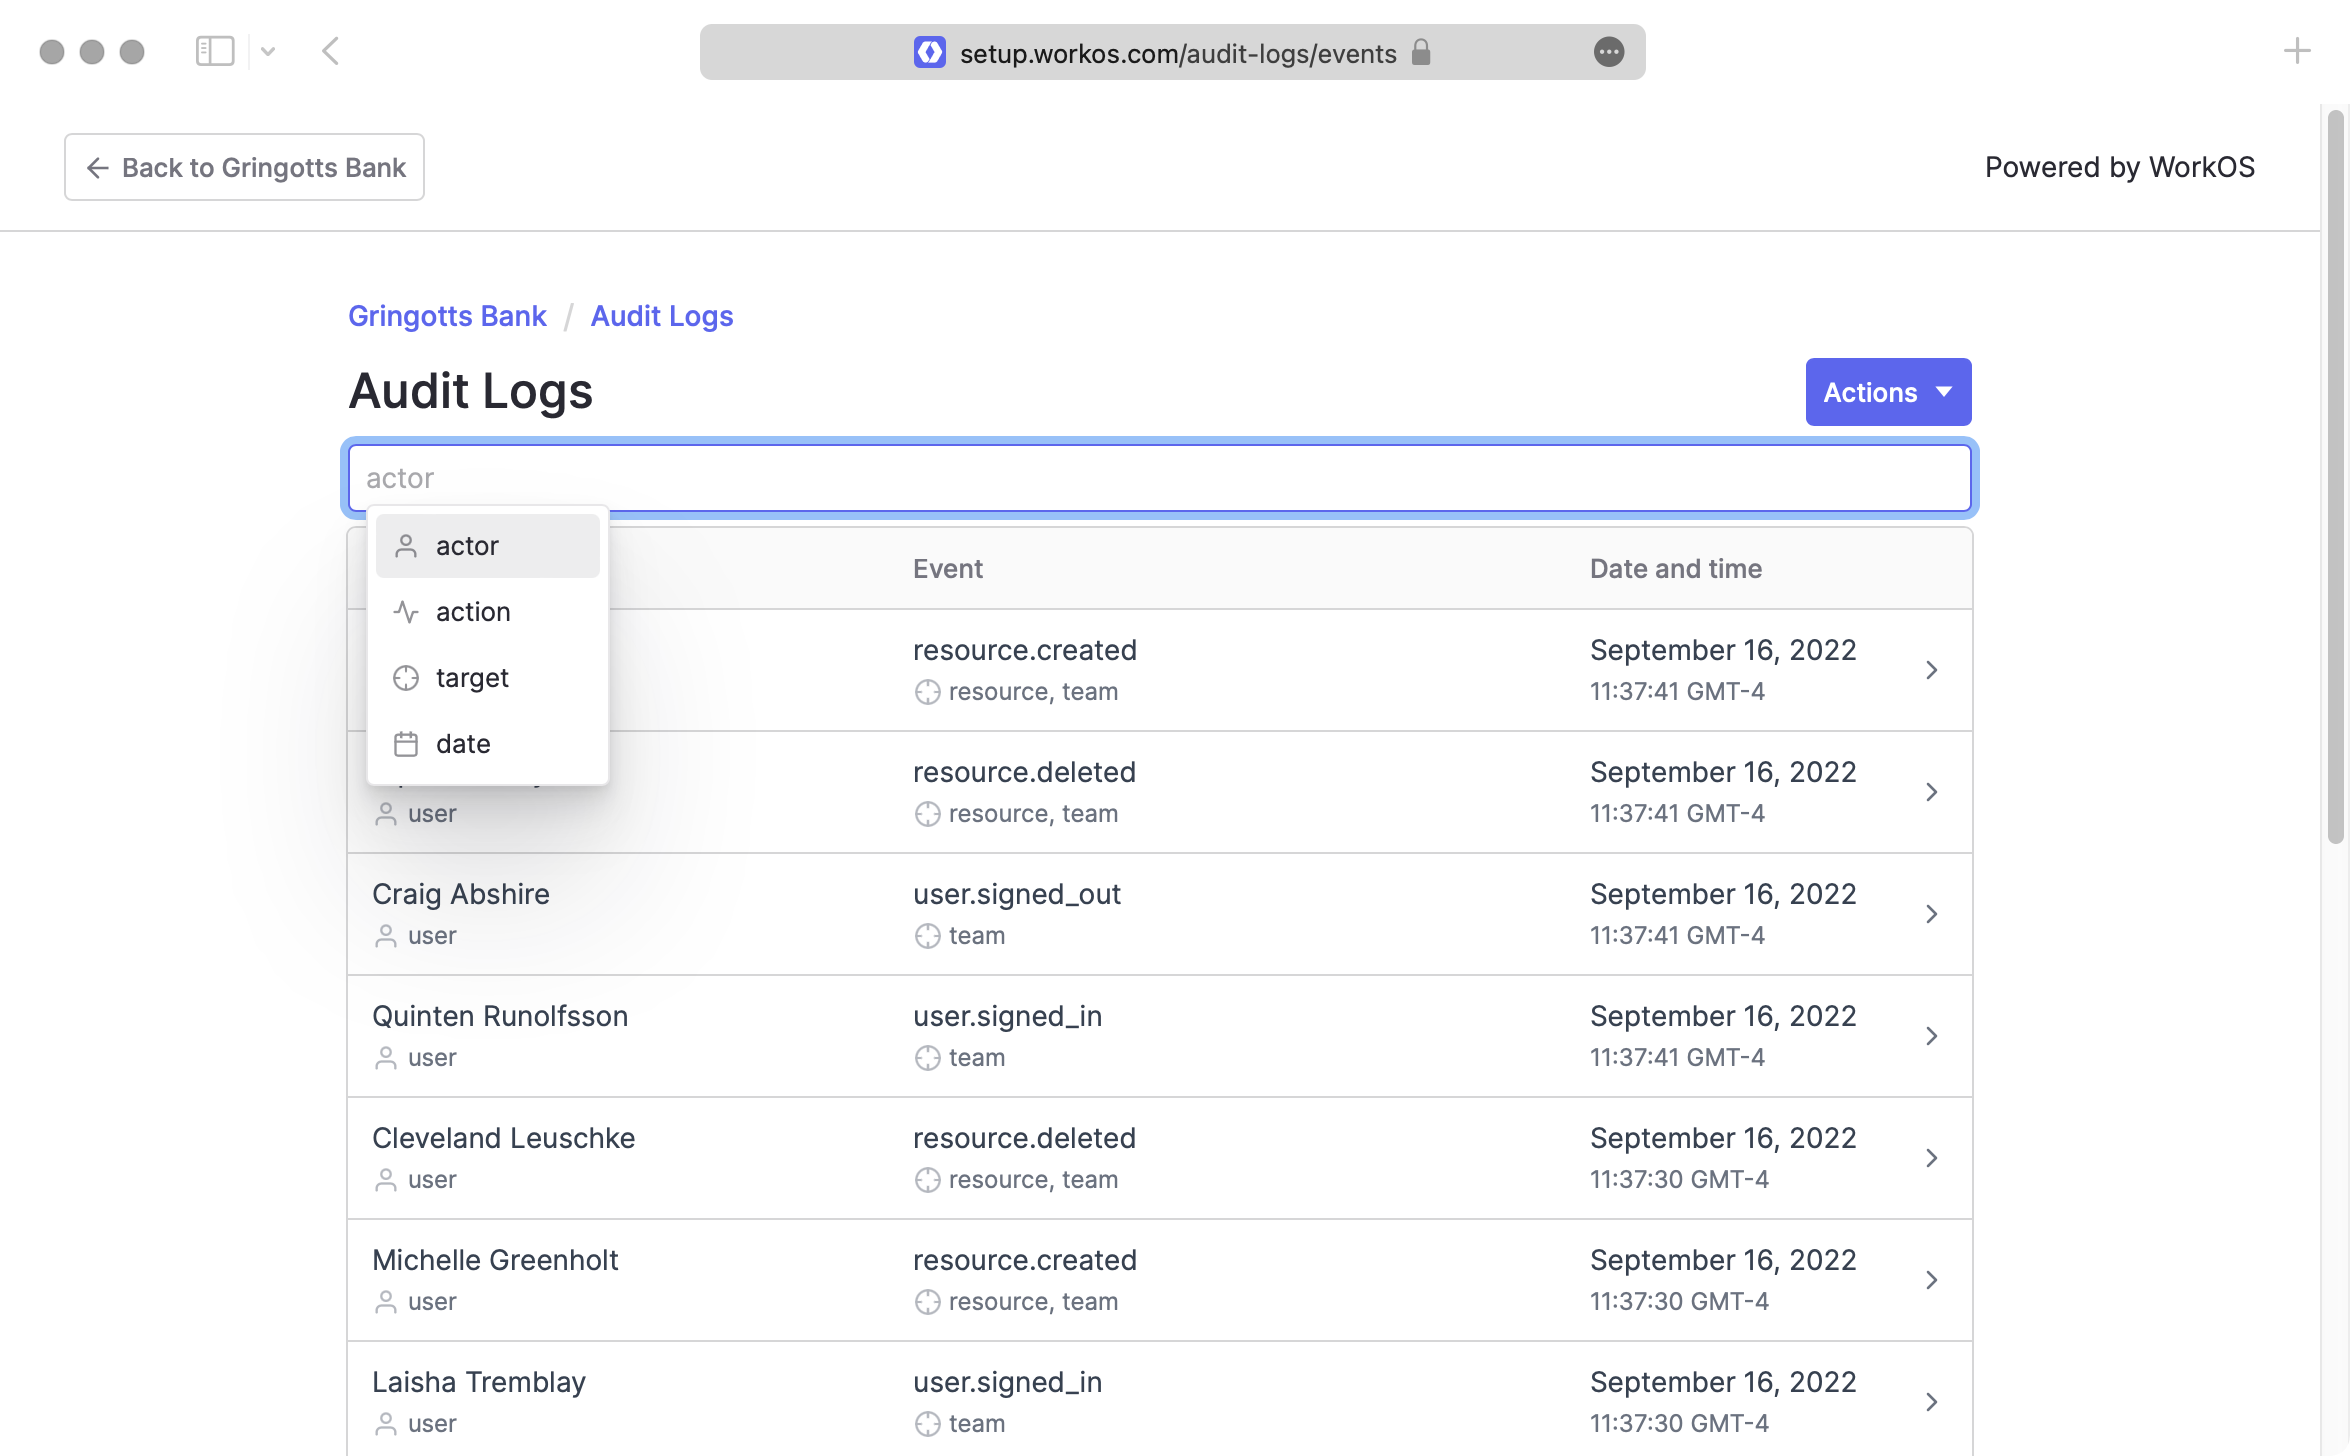 A screenshot showing Audit Log events in the WorkOS Admin Portal.